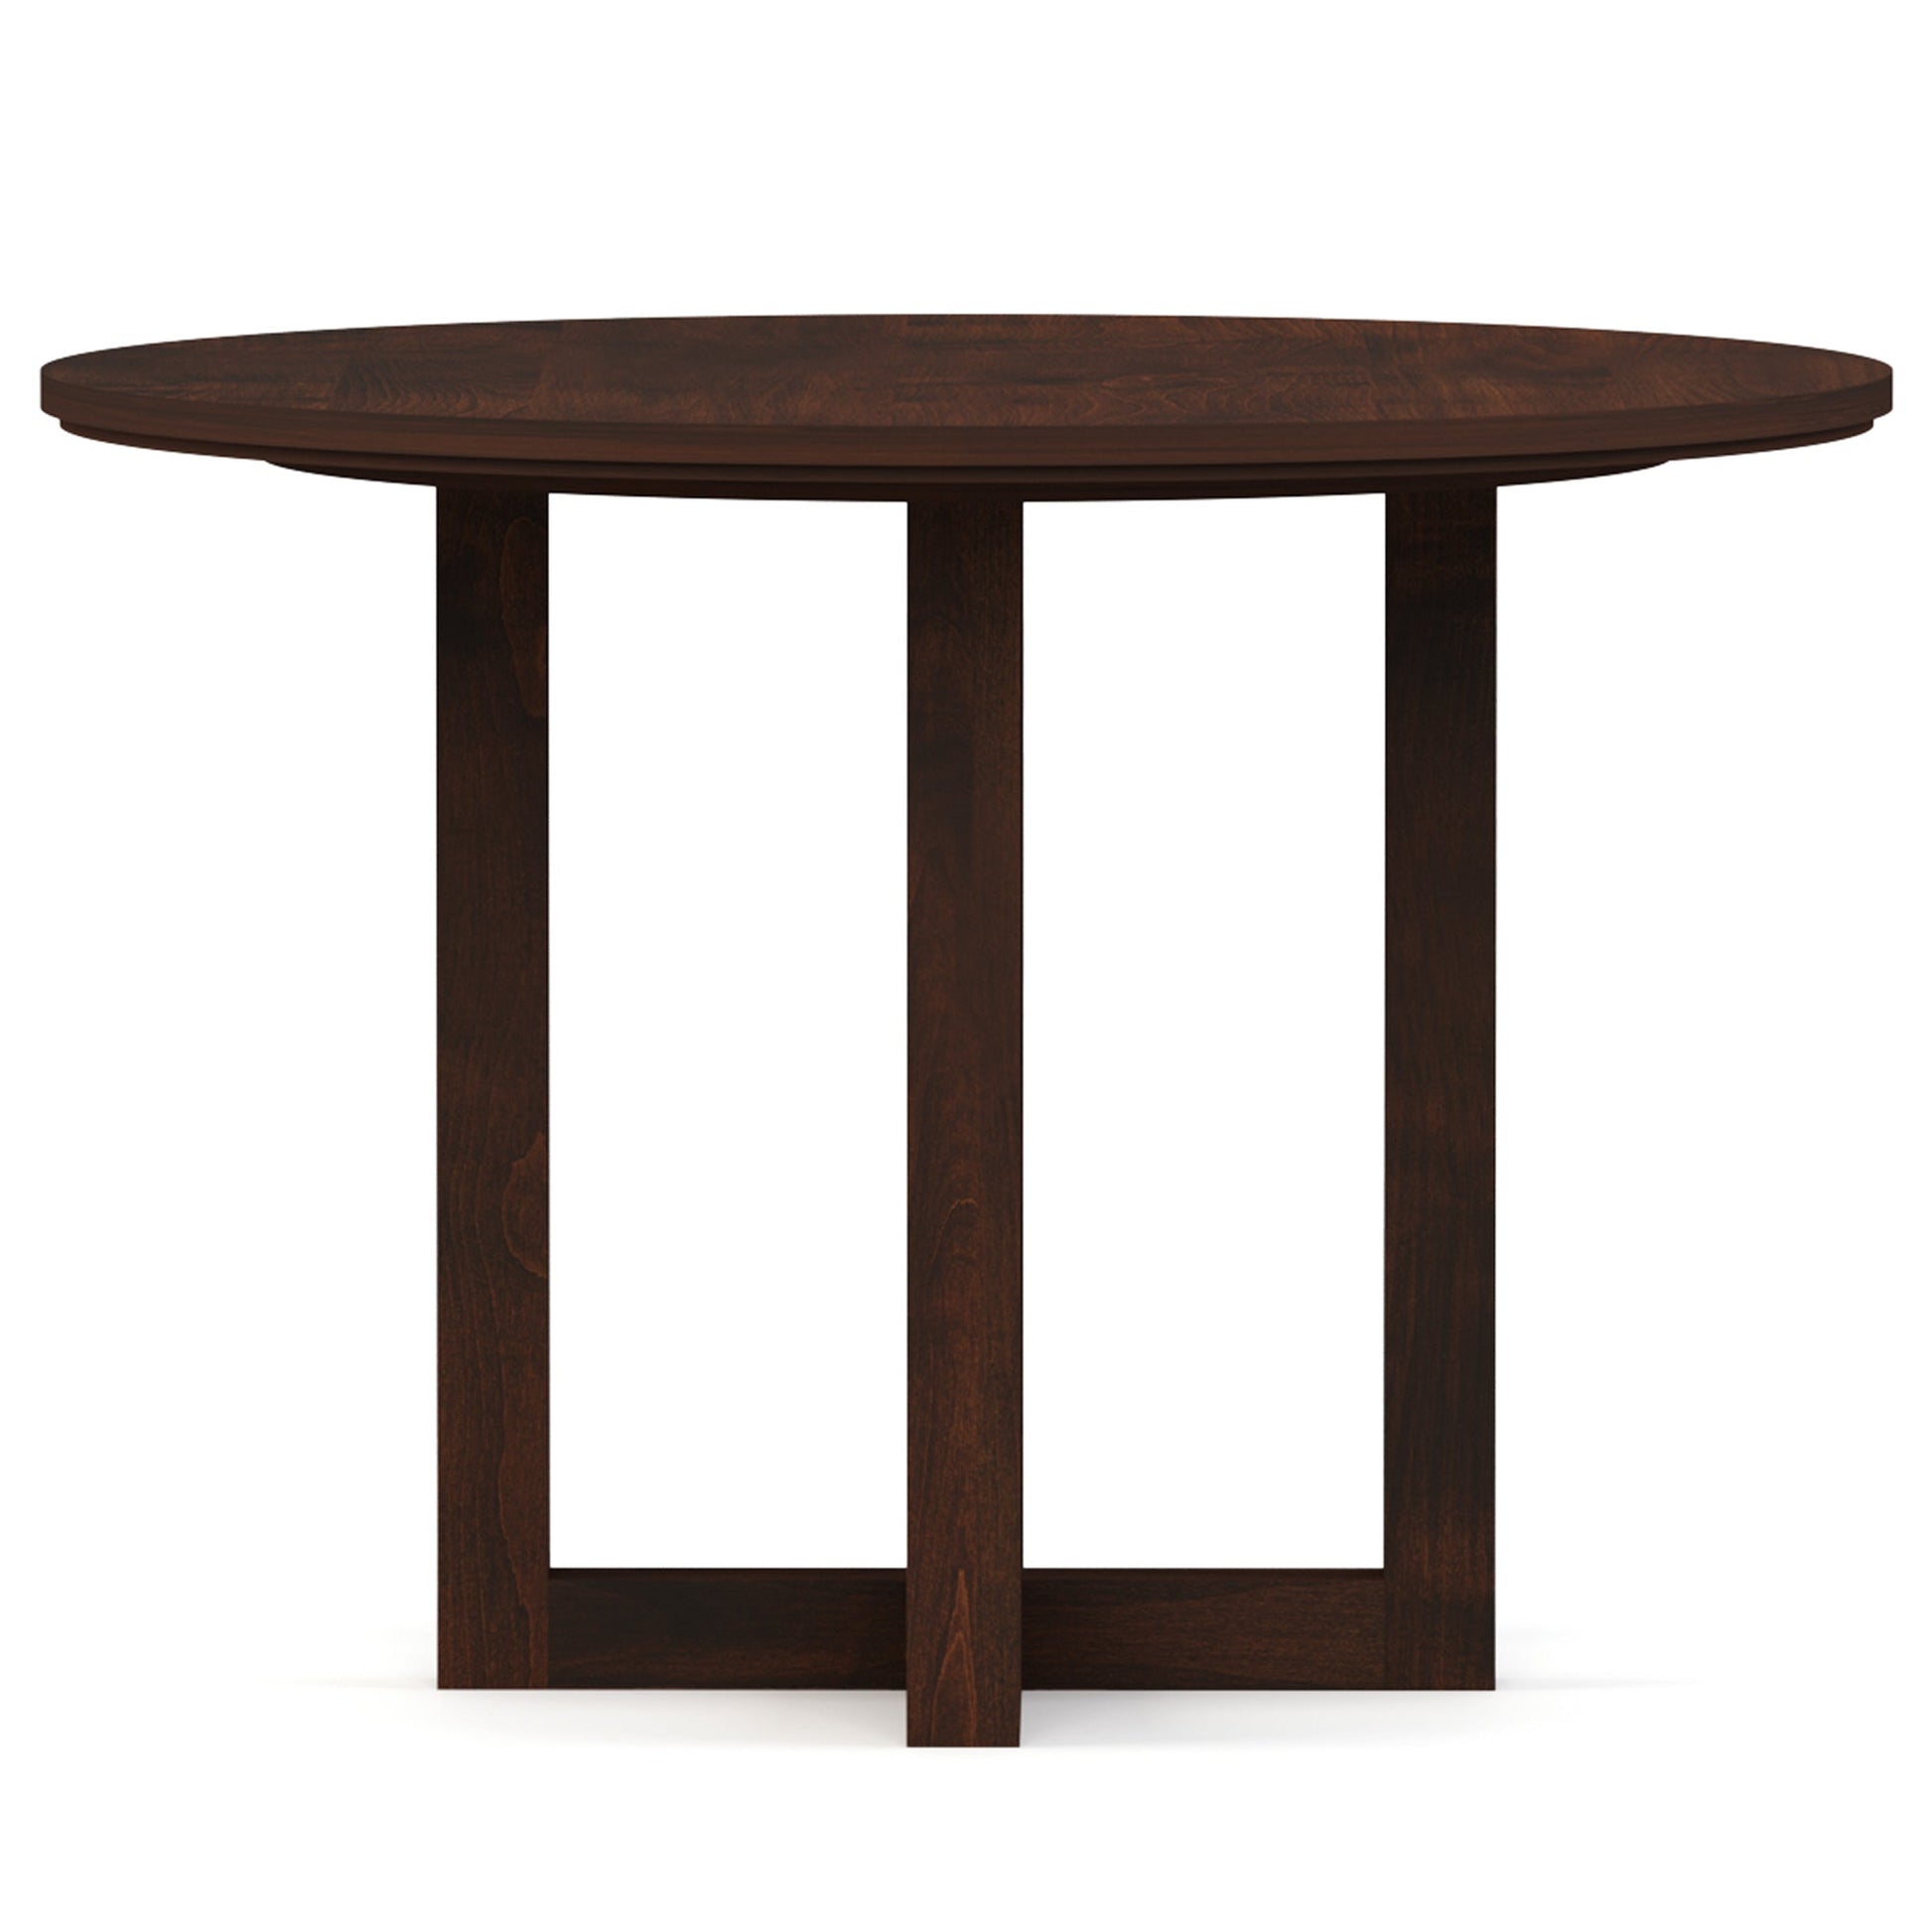 Dwyer 42-inch Round Dining Table